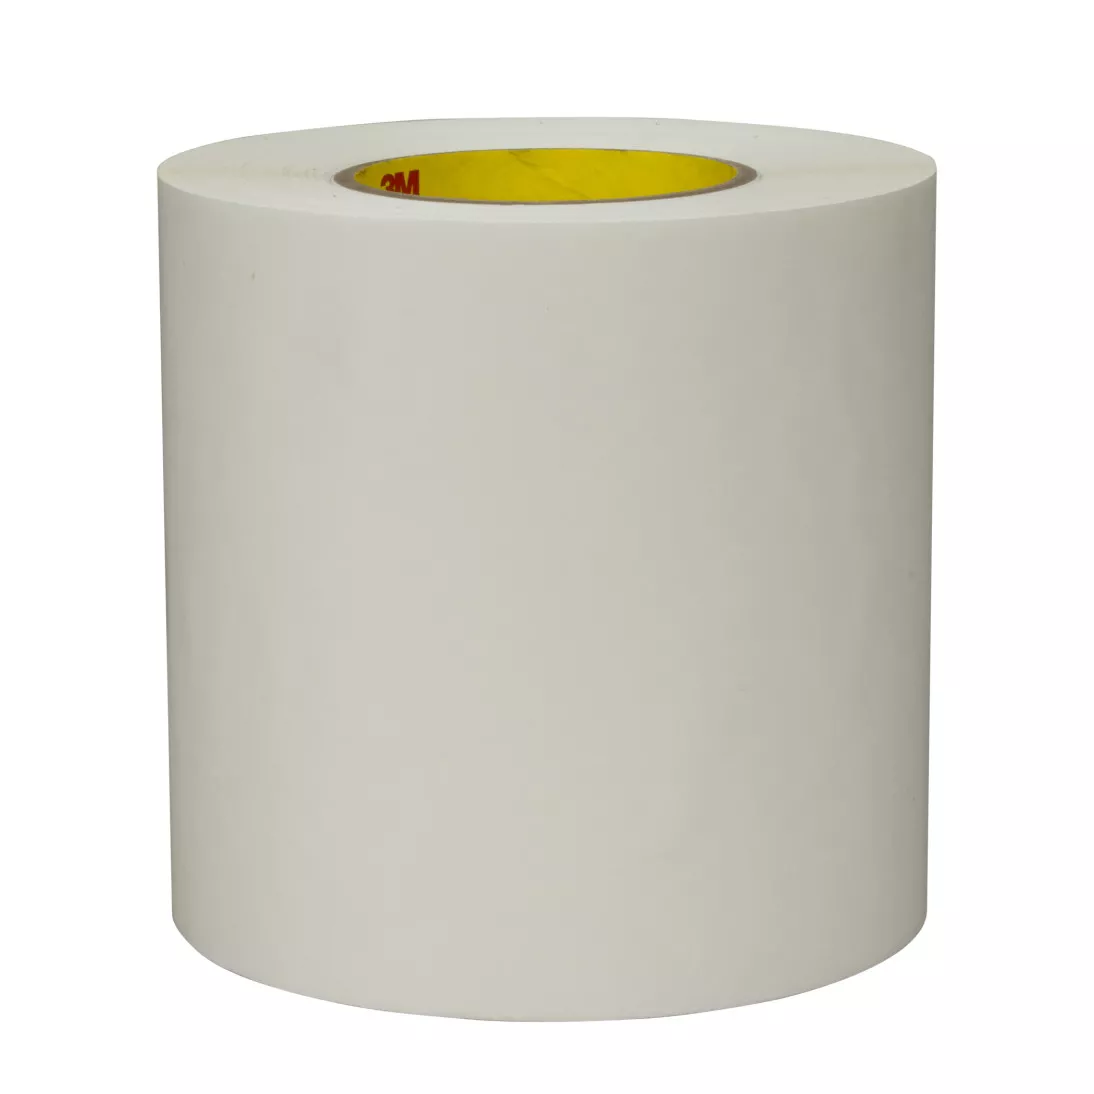 3M™ Double Coated Tape 9443NP, Clear, 1 in x 60 yd, 6 mil, 36 rolls per
case